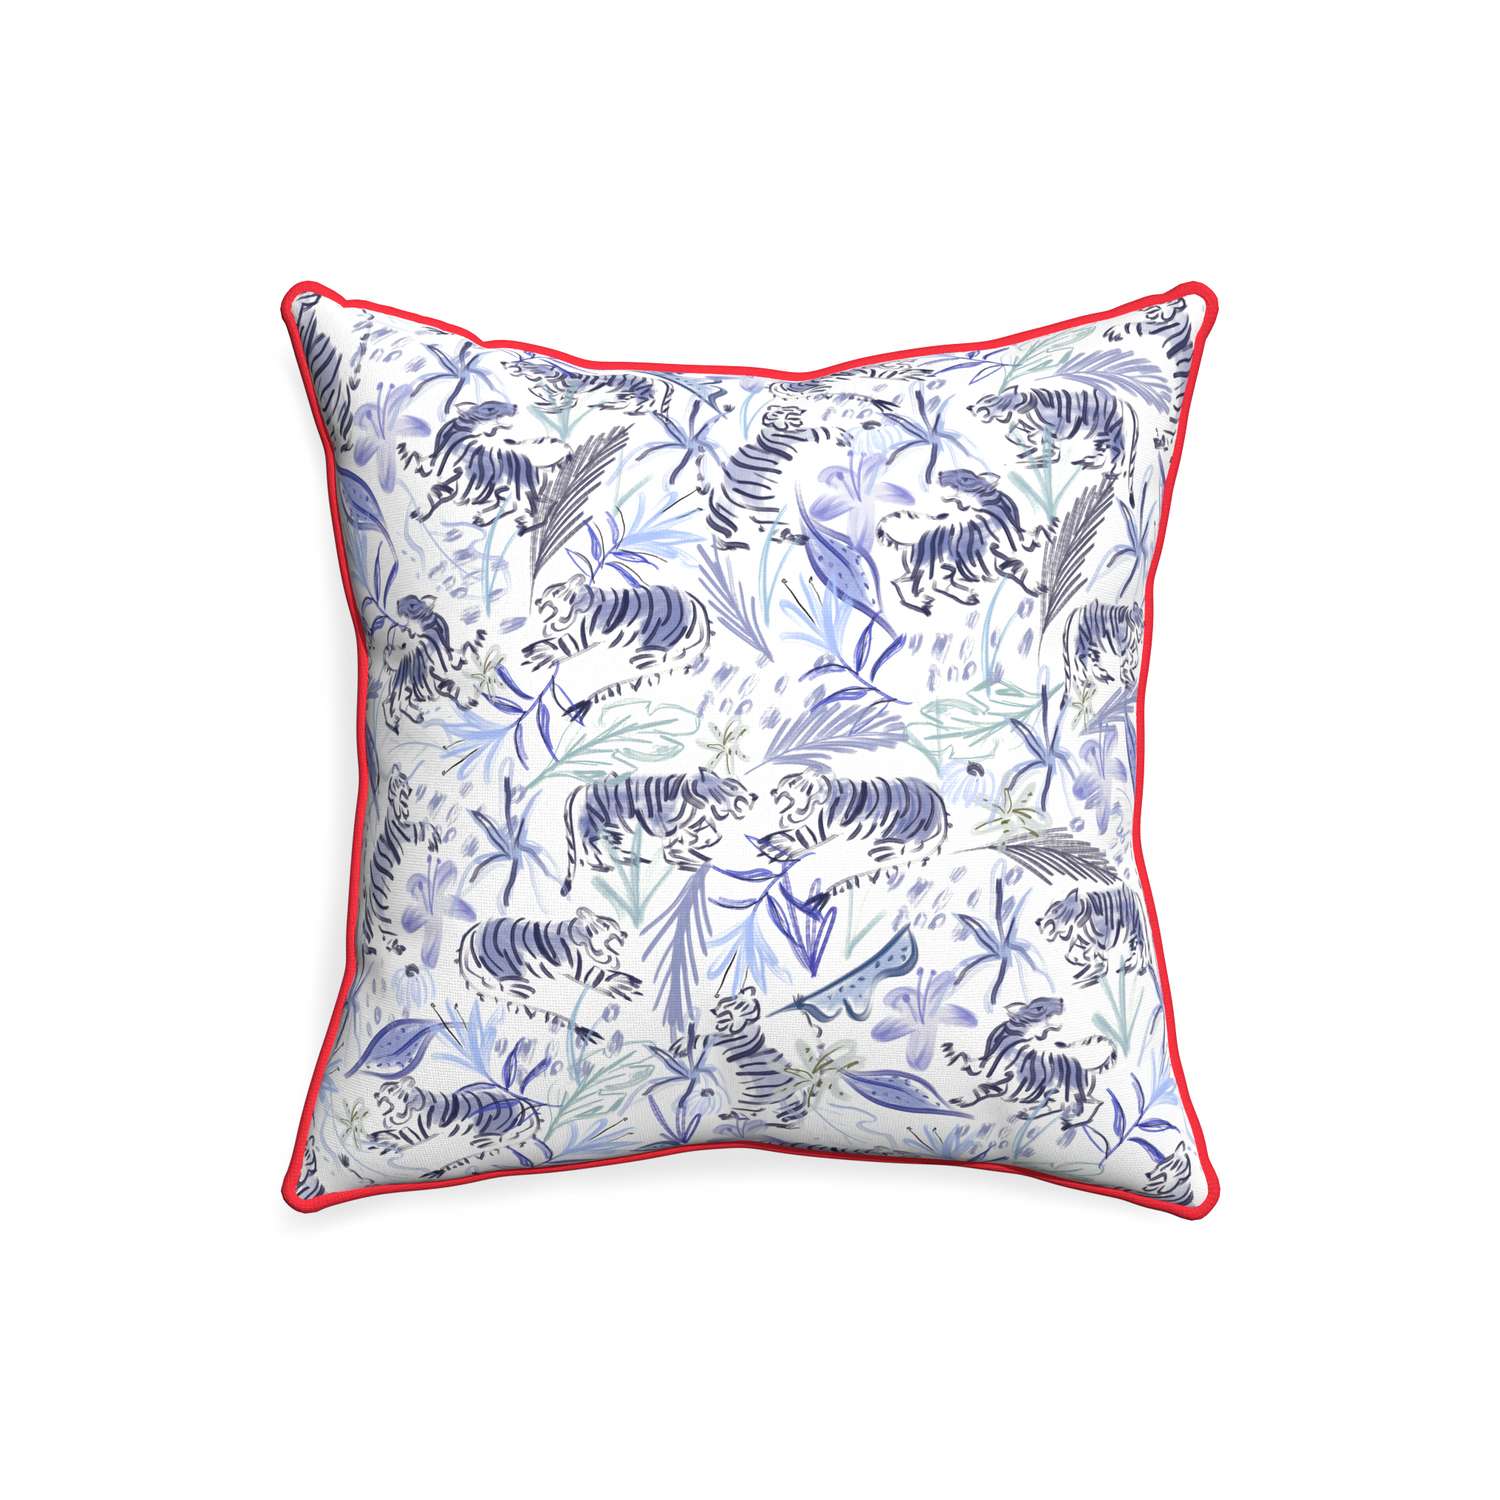 20-square frida blue custom blue with intricate tiger designpillow with cherry piping on white background